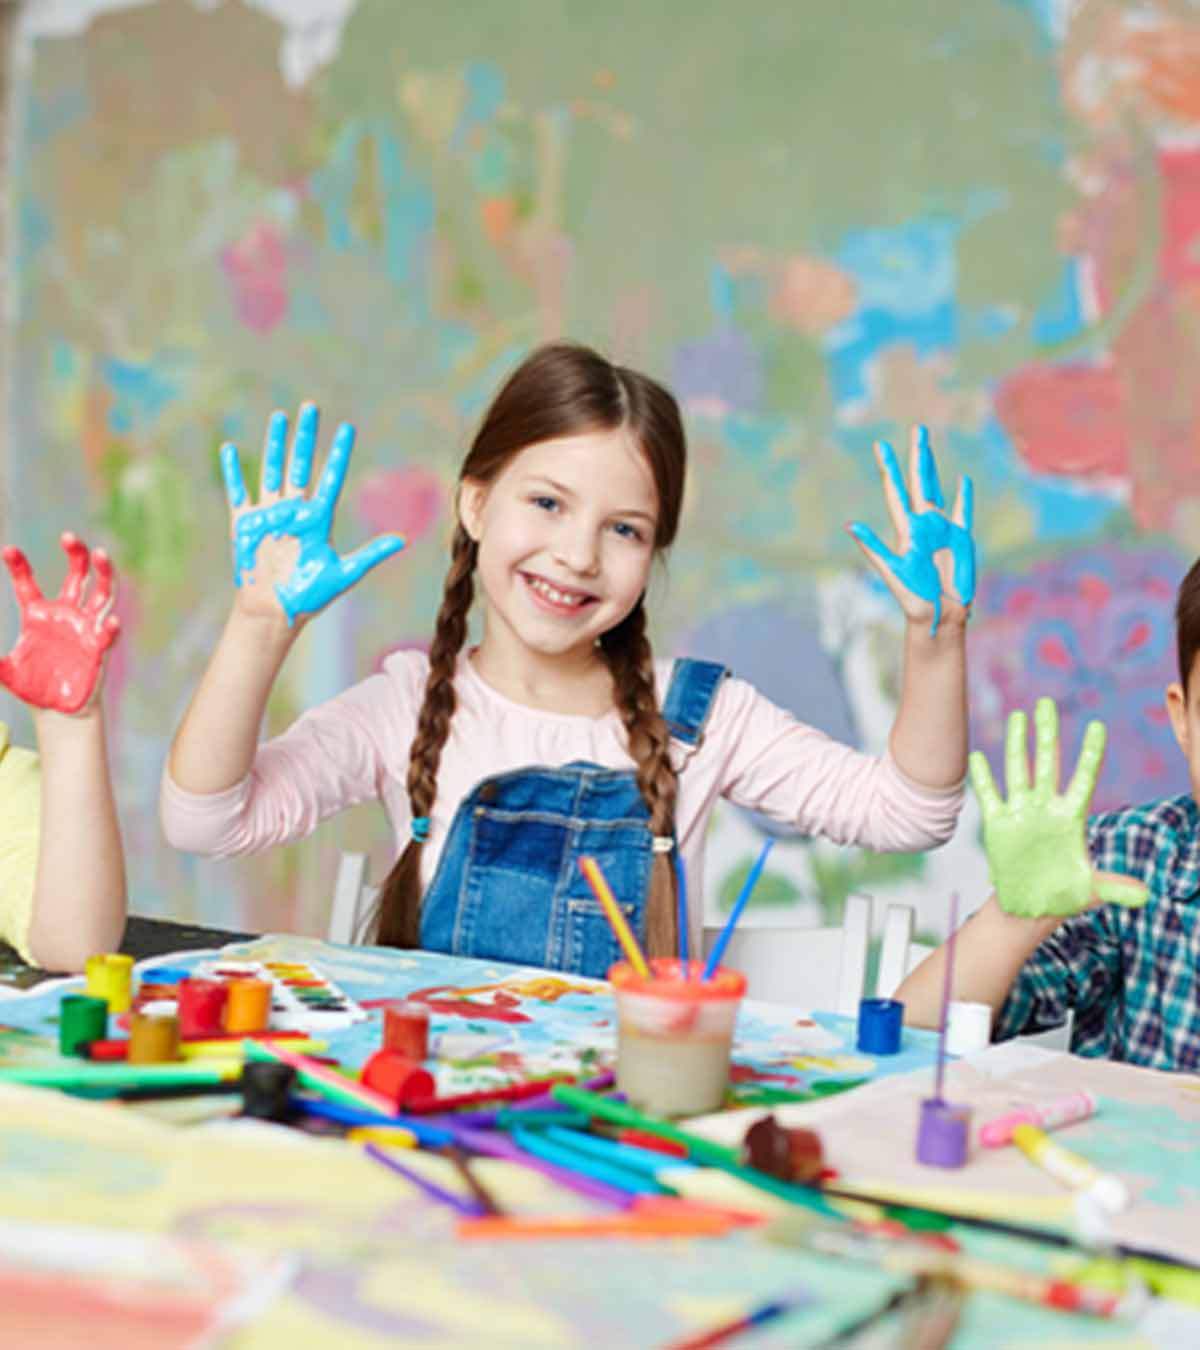 21 Creative Kids Finger Painting Ideas And Ways To Do Them